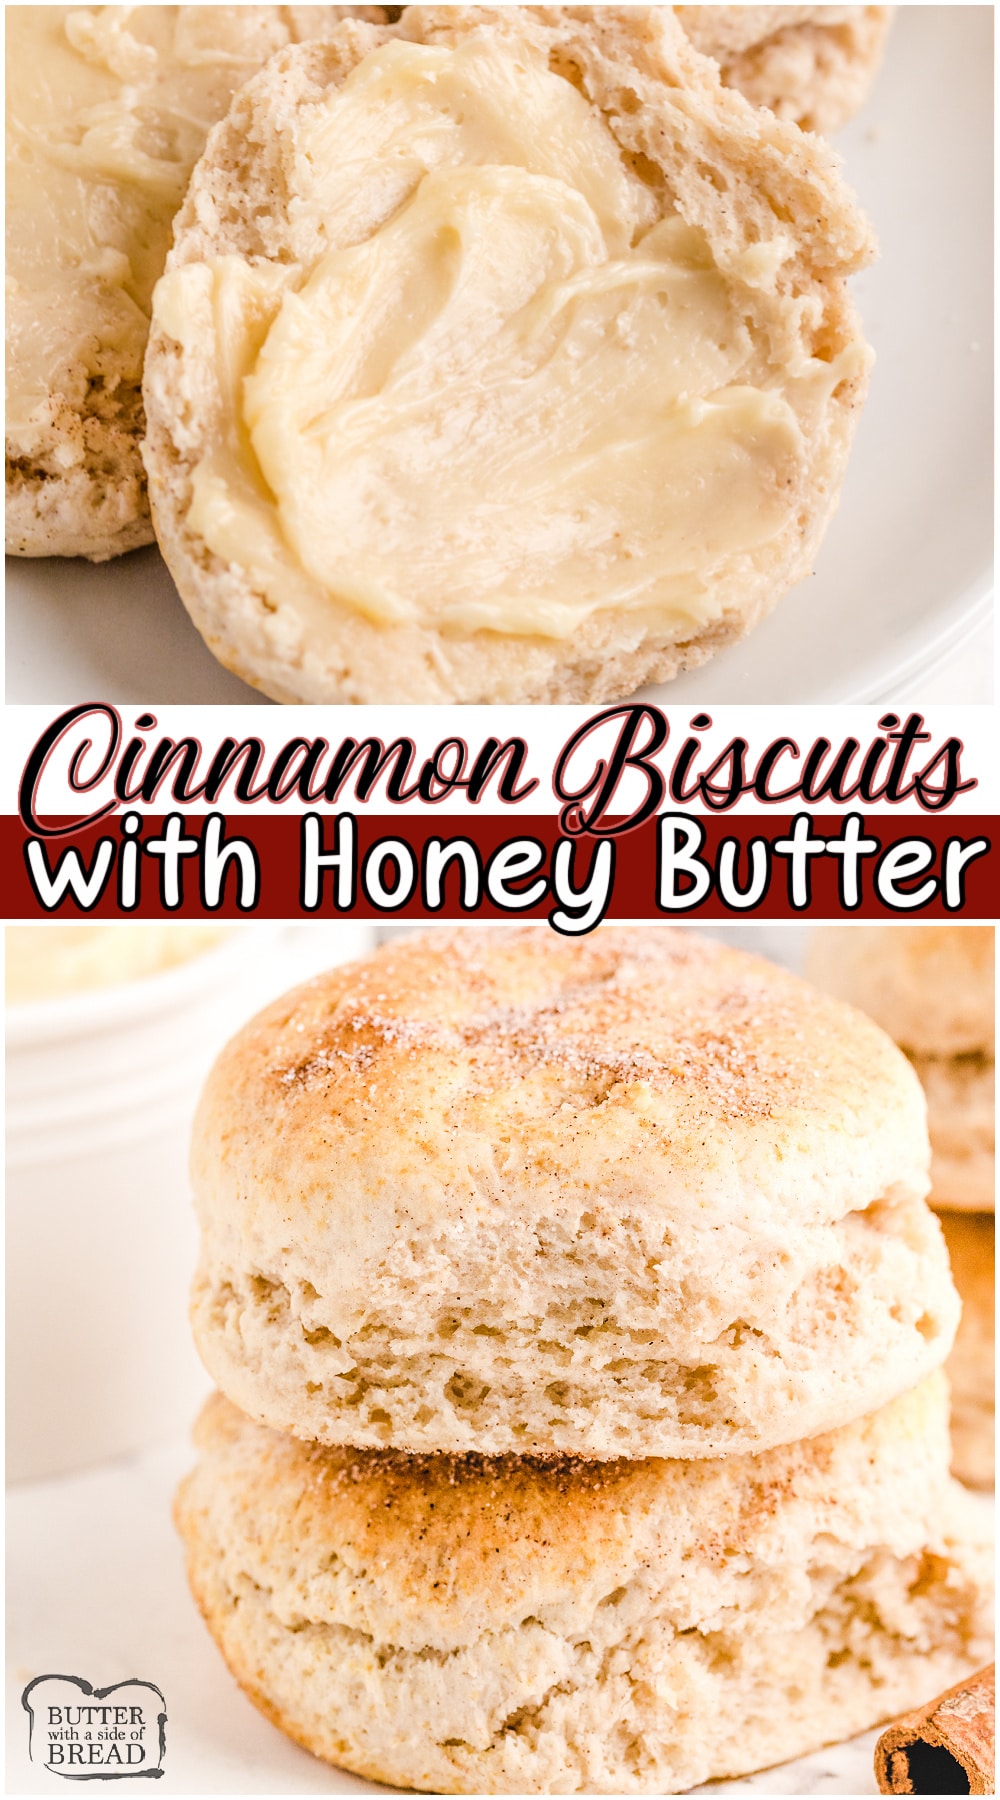 Easy biscuit recipe with a touch of cinnamon pairs well with sweet homemade honey butter. From scratch sweet flaky biscuits made with classic ingredients that are easy to make! #biscuits #honeybutter #homemade #baking #biscuitrecipe from BUTTER WITH A SIDE OF BREAD